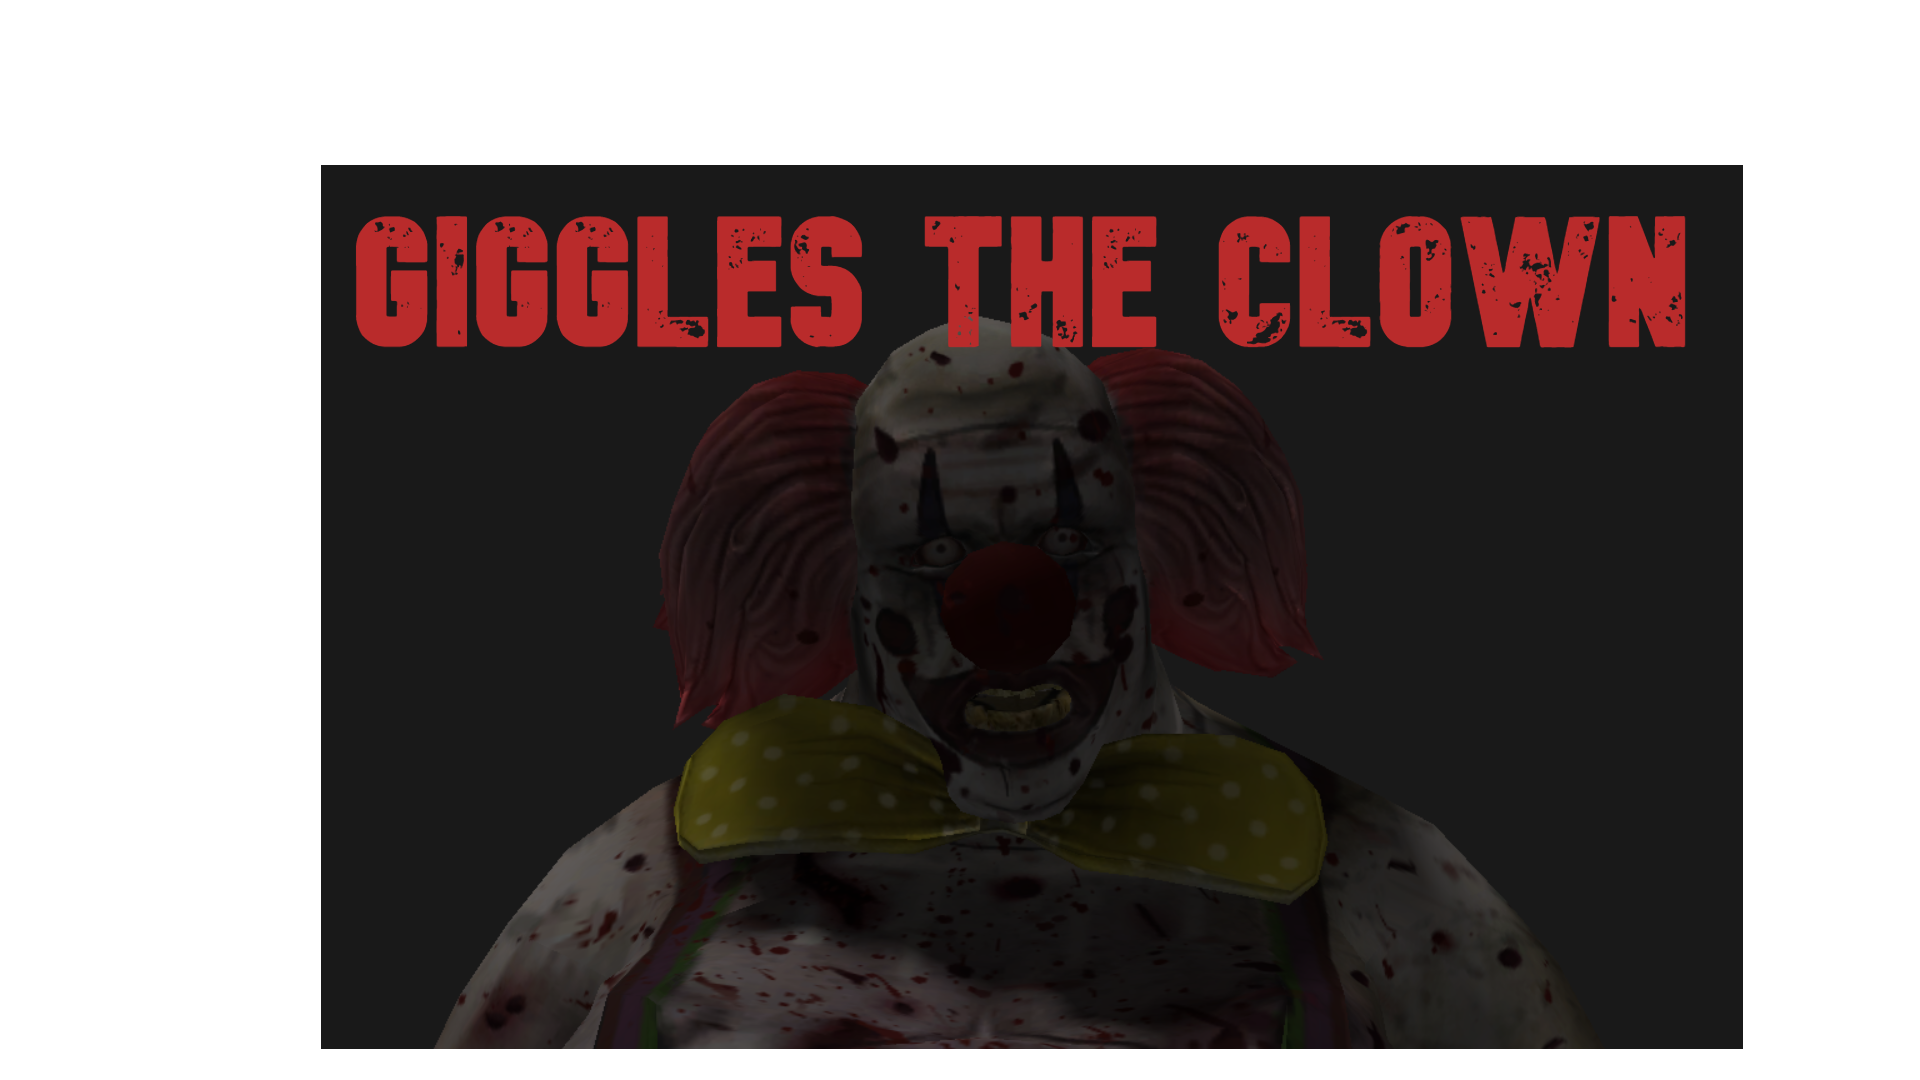 Giggles the clown